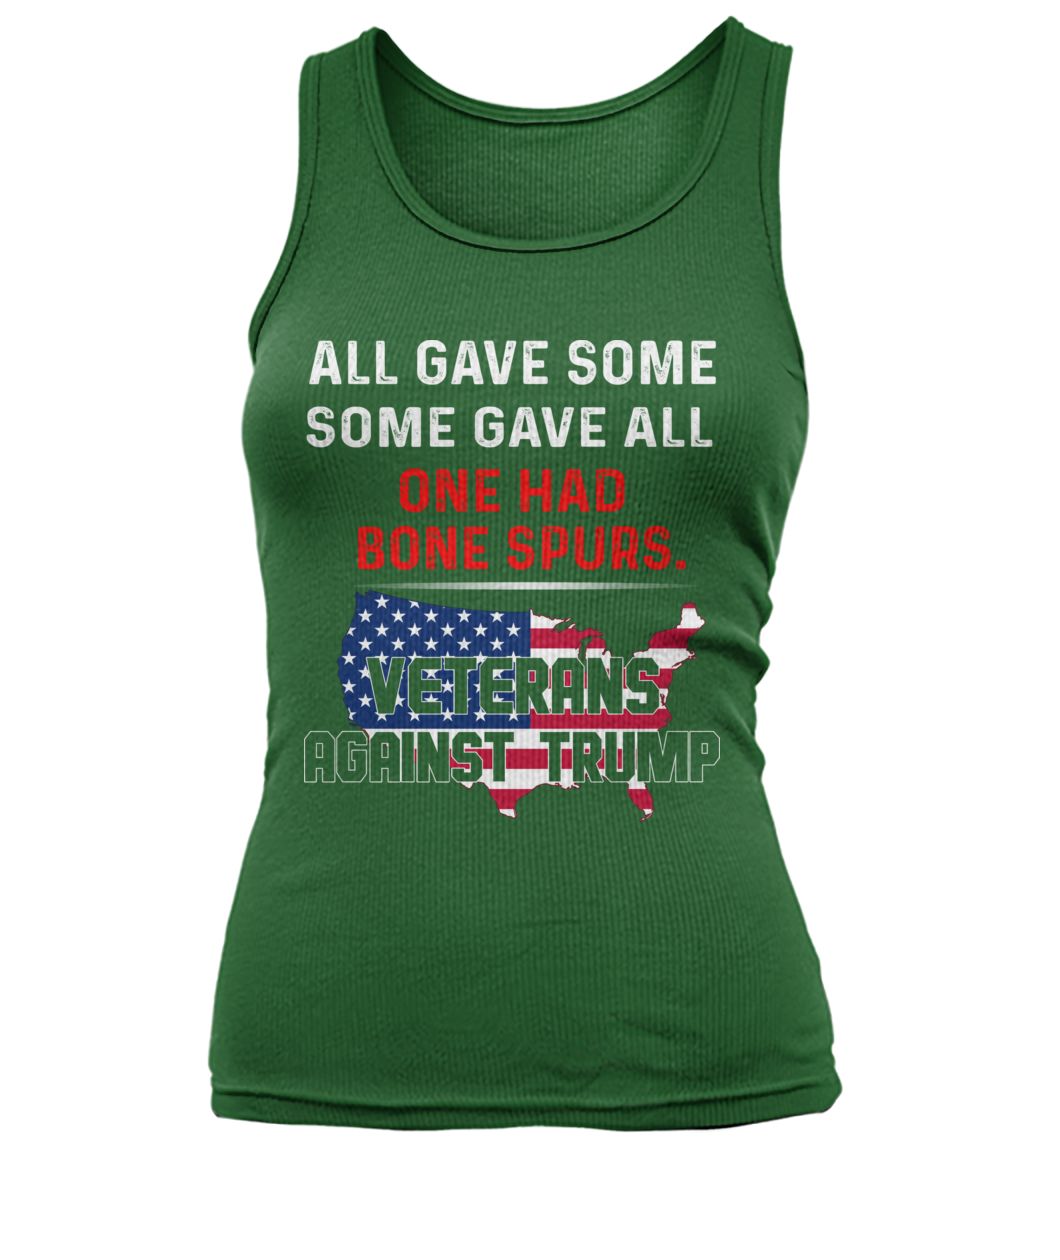 All gave some gave all one had bone spurs veterans against trump women's tank top